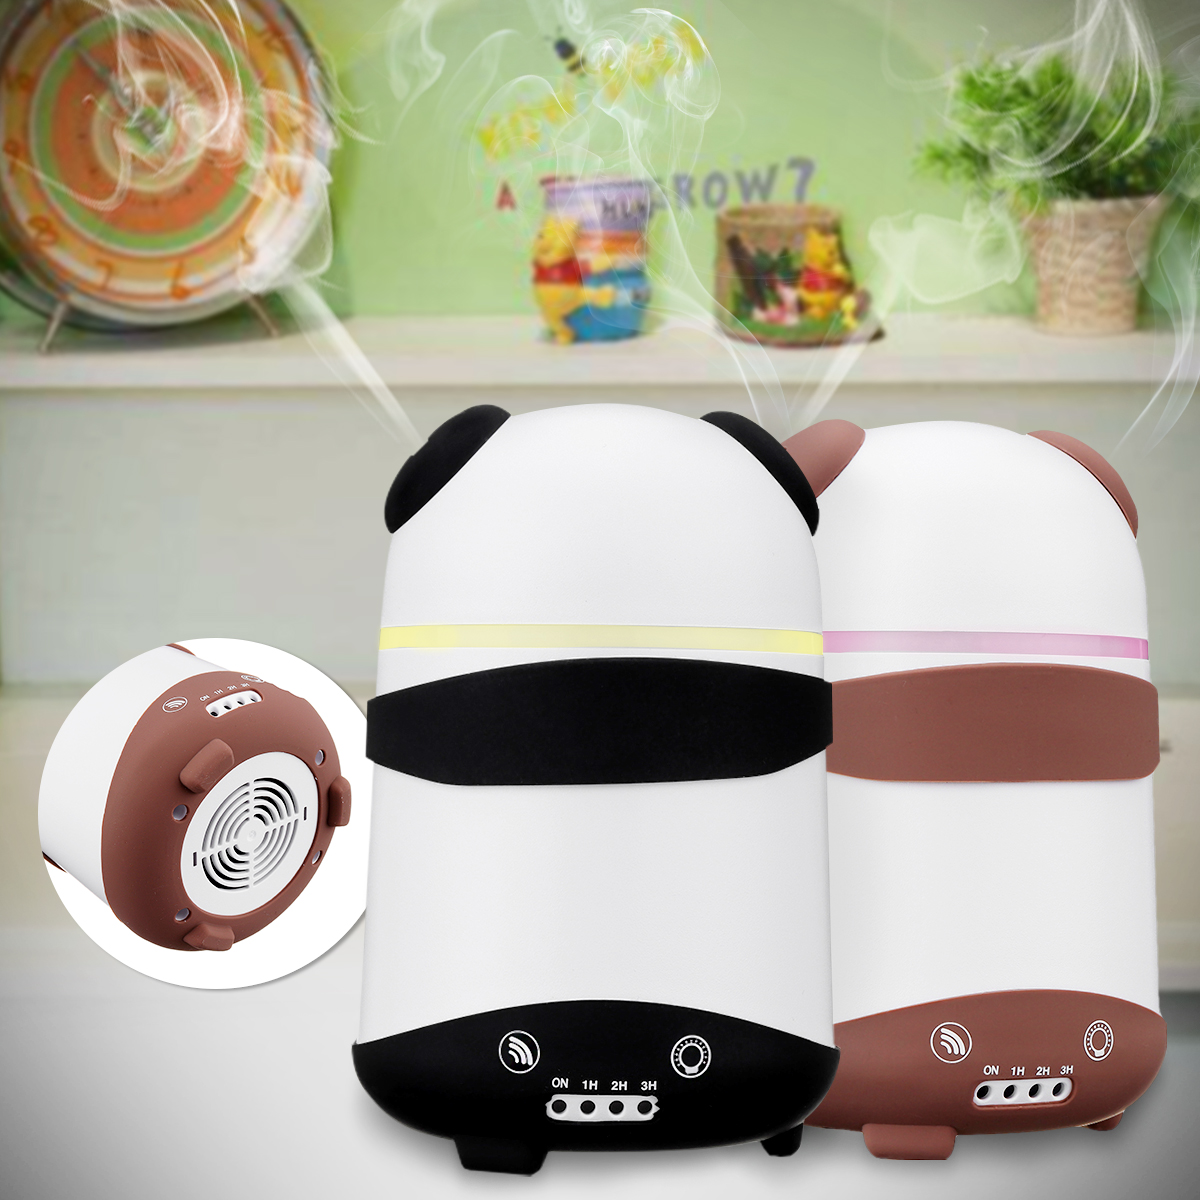 Dual Humidifier Air Oil Diffuser Aroma Mist Maker LED Cartoon Panda Style For Home Office US Plug 48